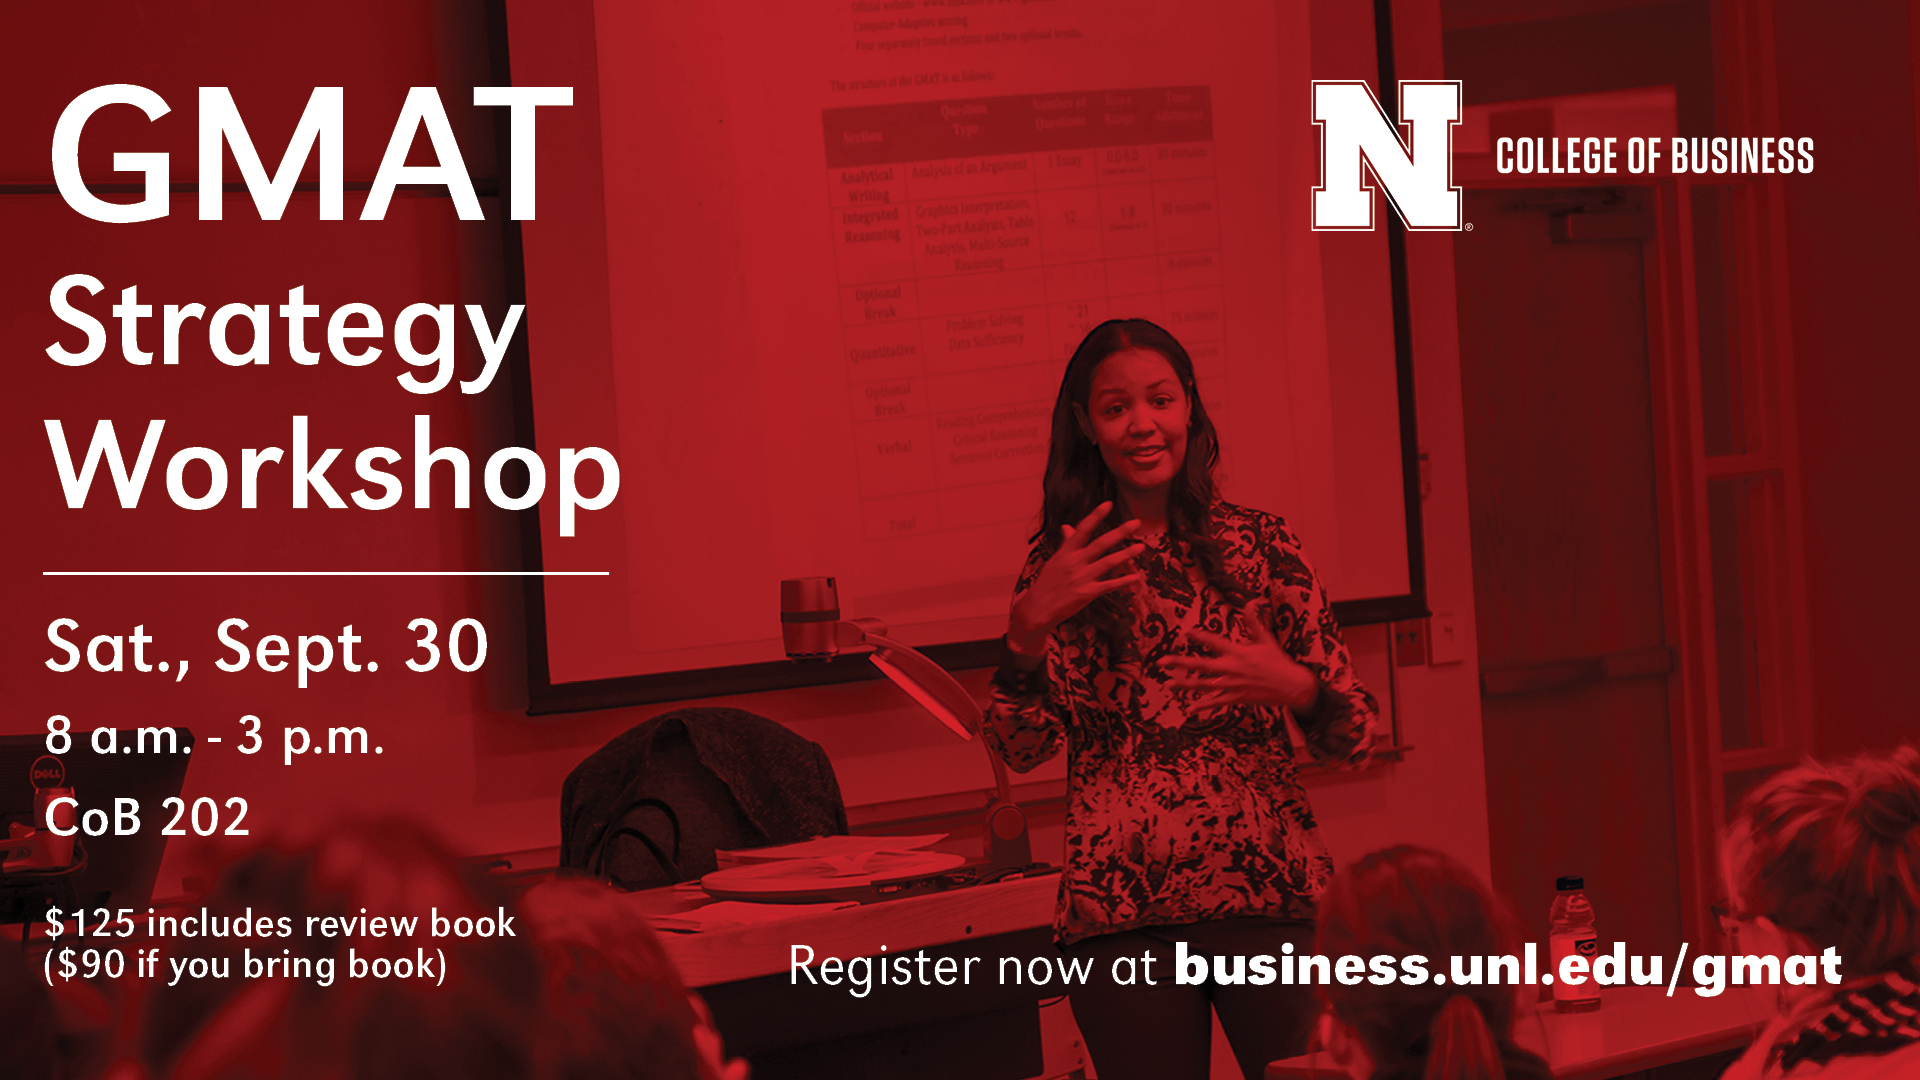 GMAT Strategy Workshop is Sept. 30.